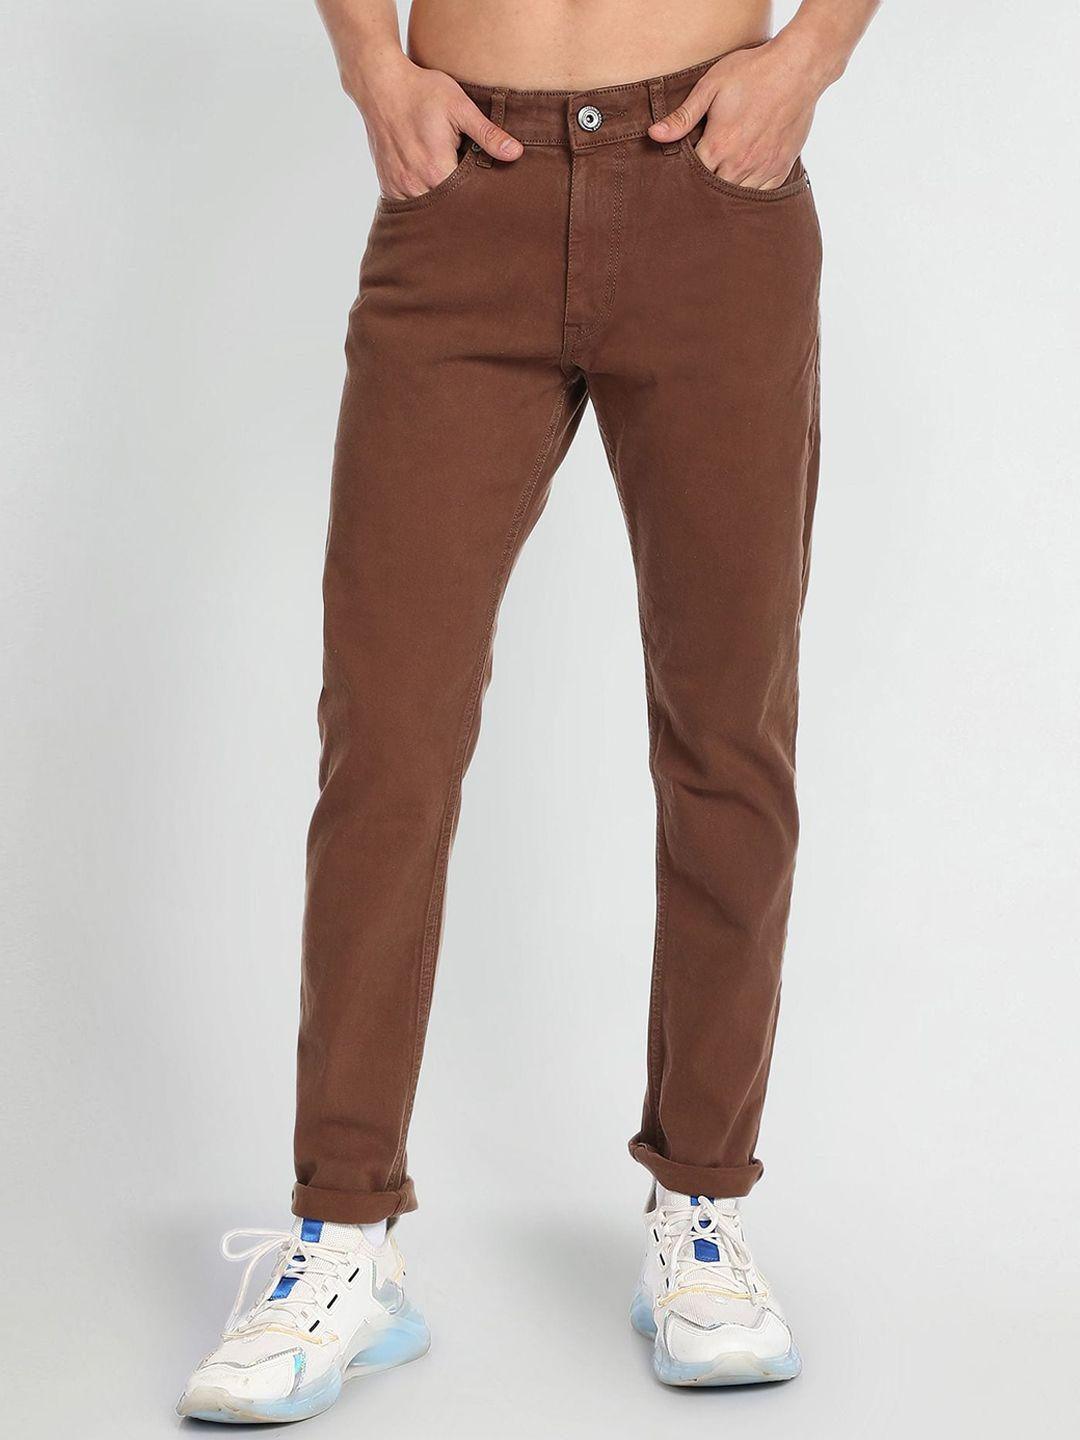 flying-machine-men-coloured-slim-fit-mid-rise-jeans